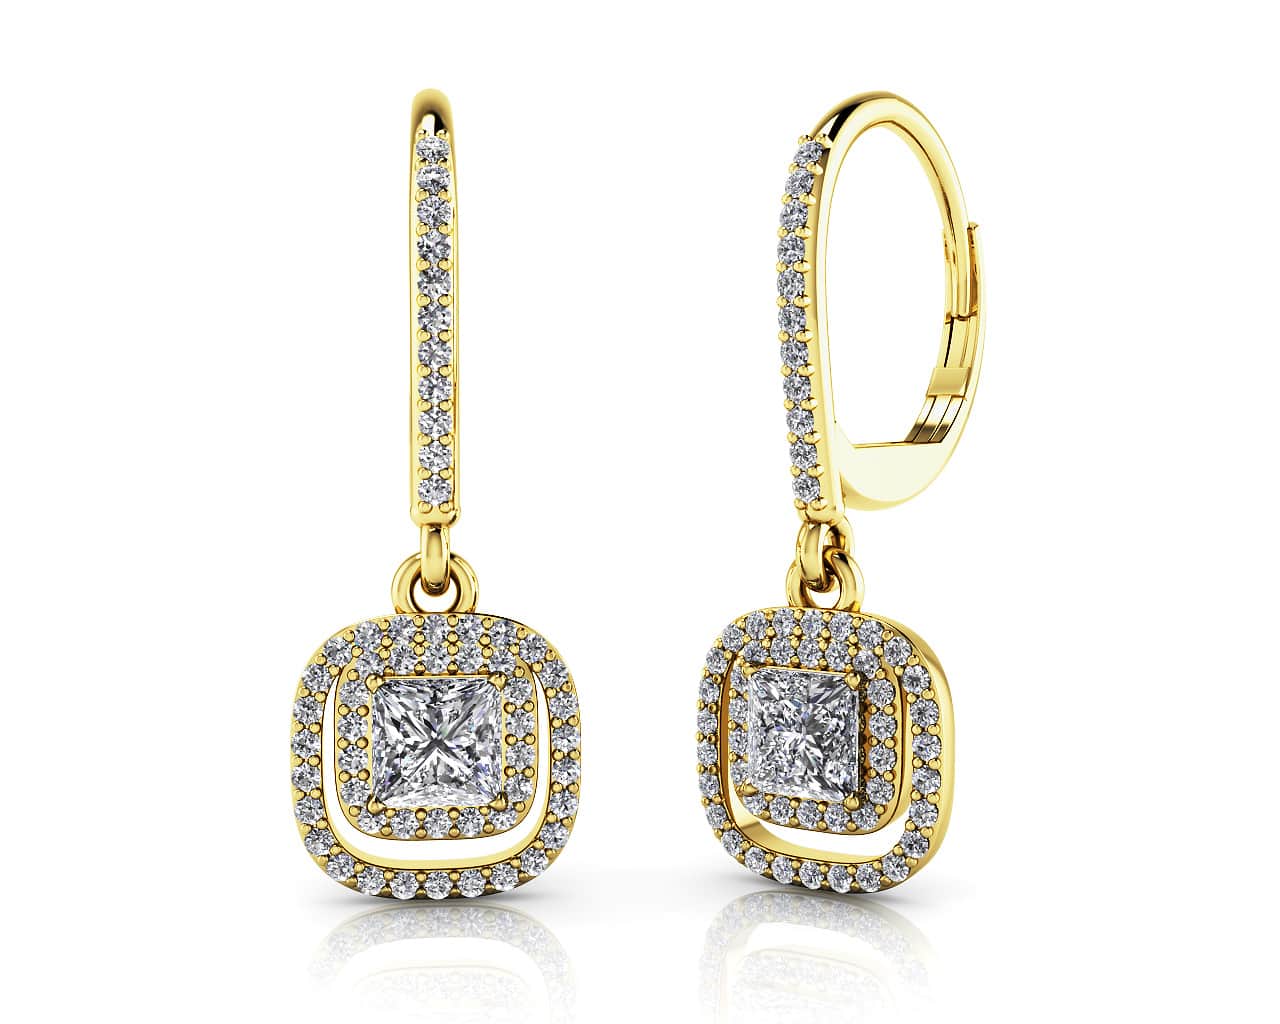 Day To Night Diamond Drop Earrings In 14K Or 18K White Gold Yellow Gold Or Platinum